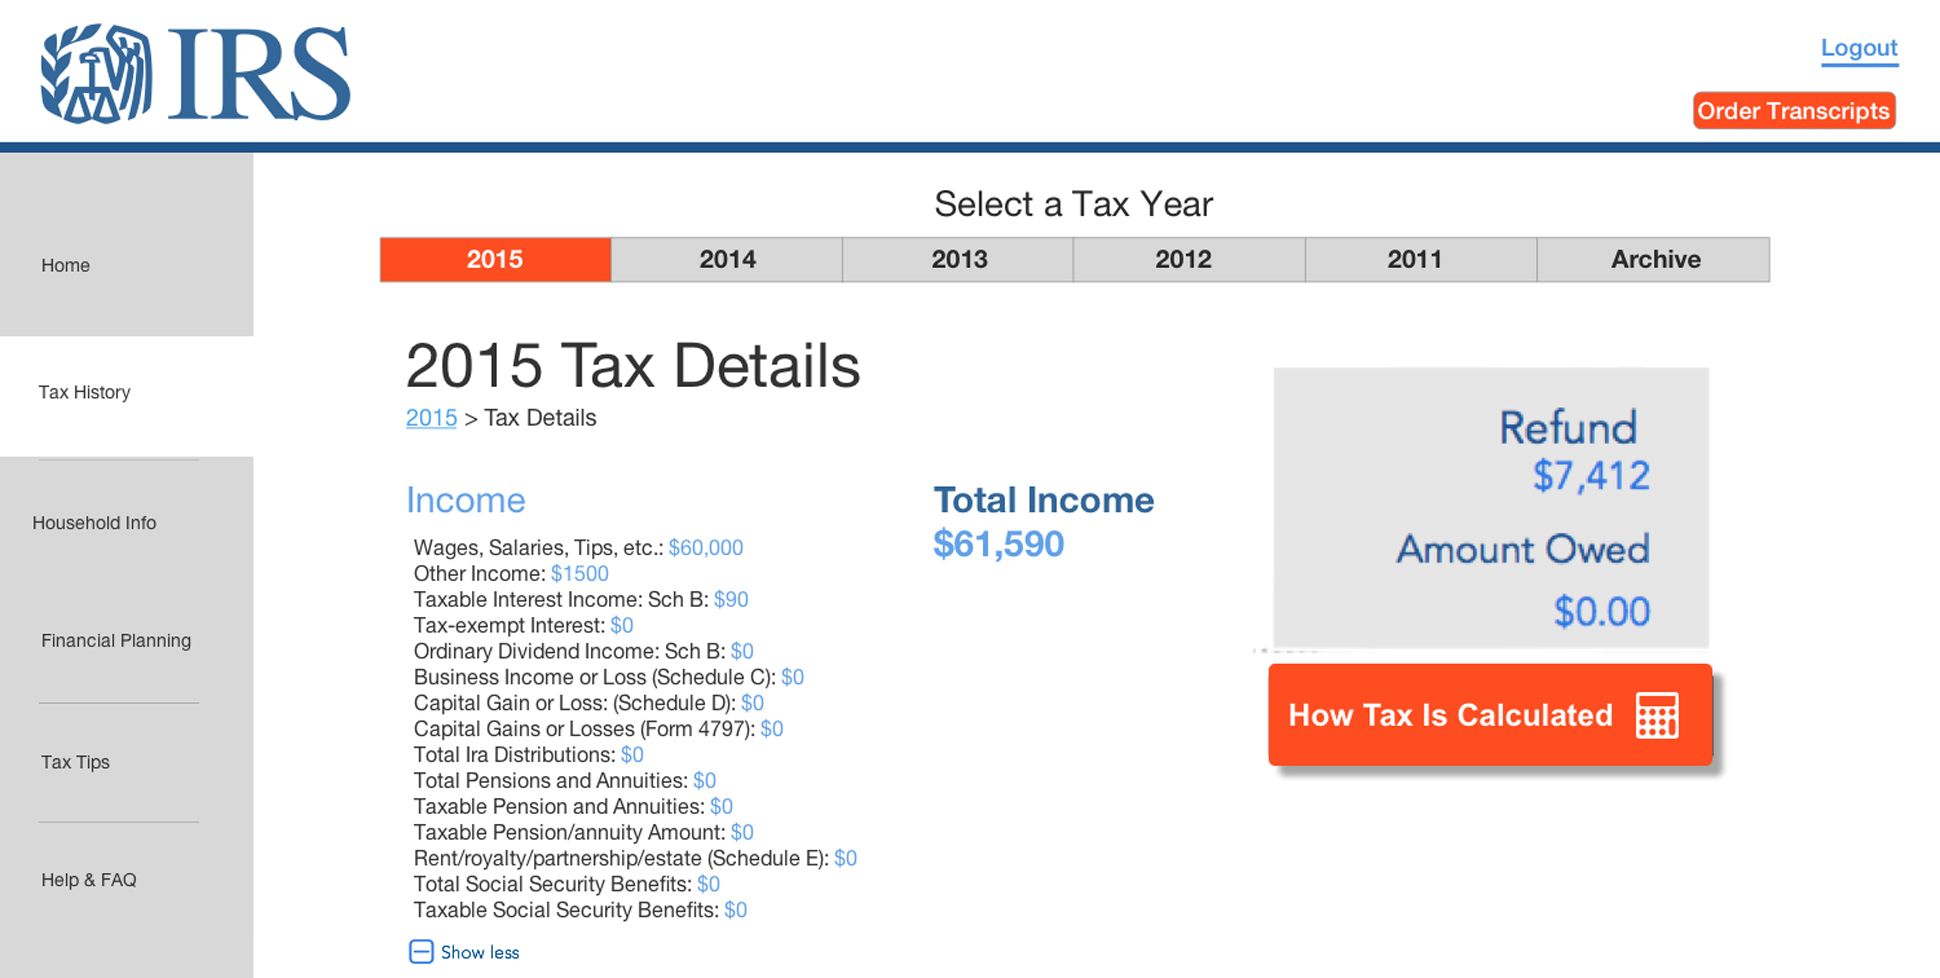 A page from a tax design challenge submission. 2015 tax details are shown in the tax history of this site. A refund of $7,412 is shown along with the total income.